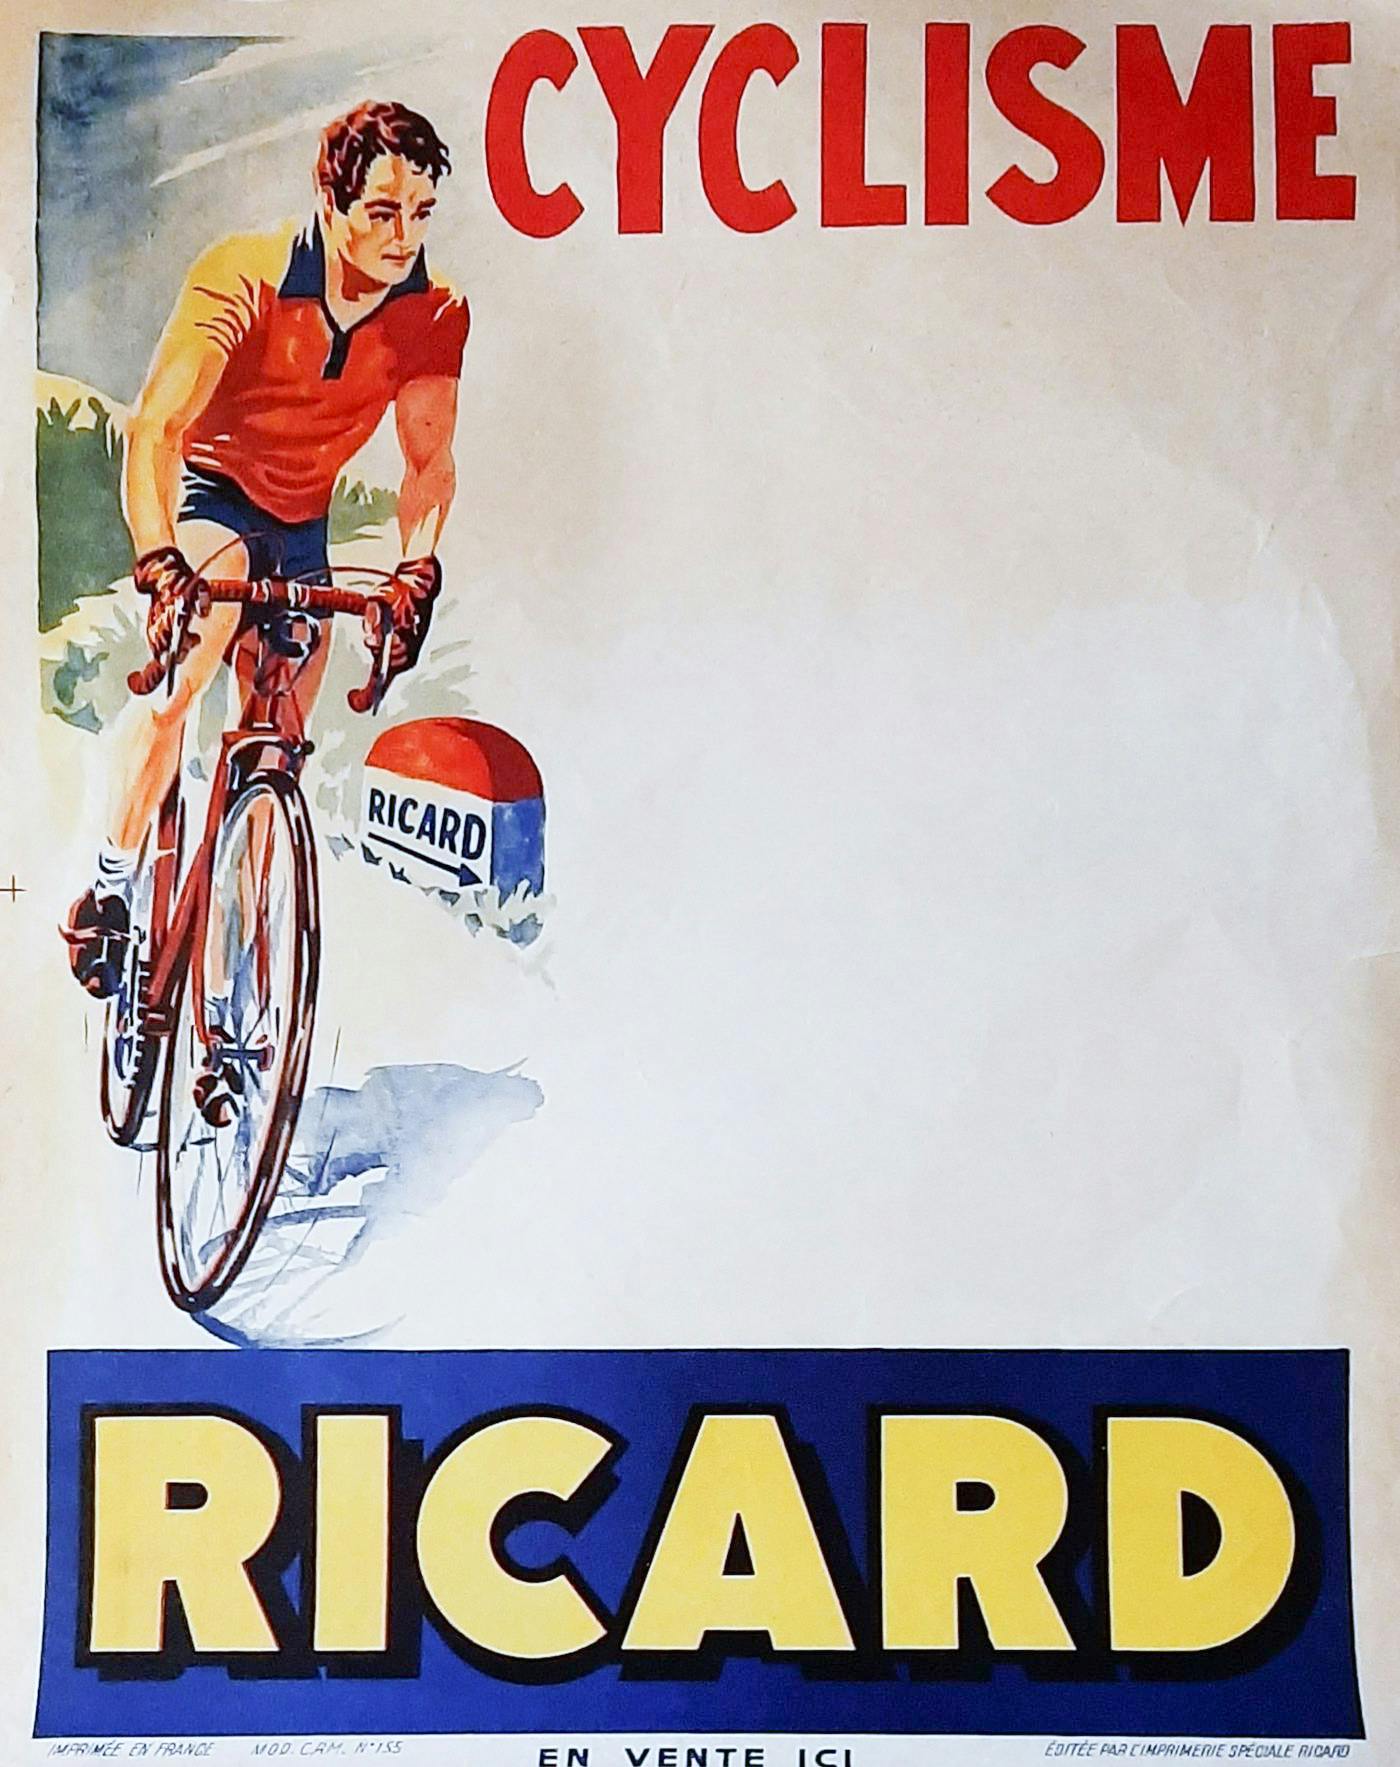 Cyclise event poster